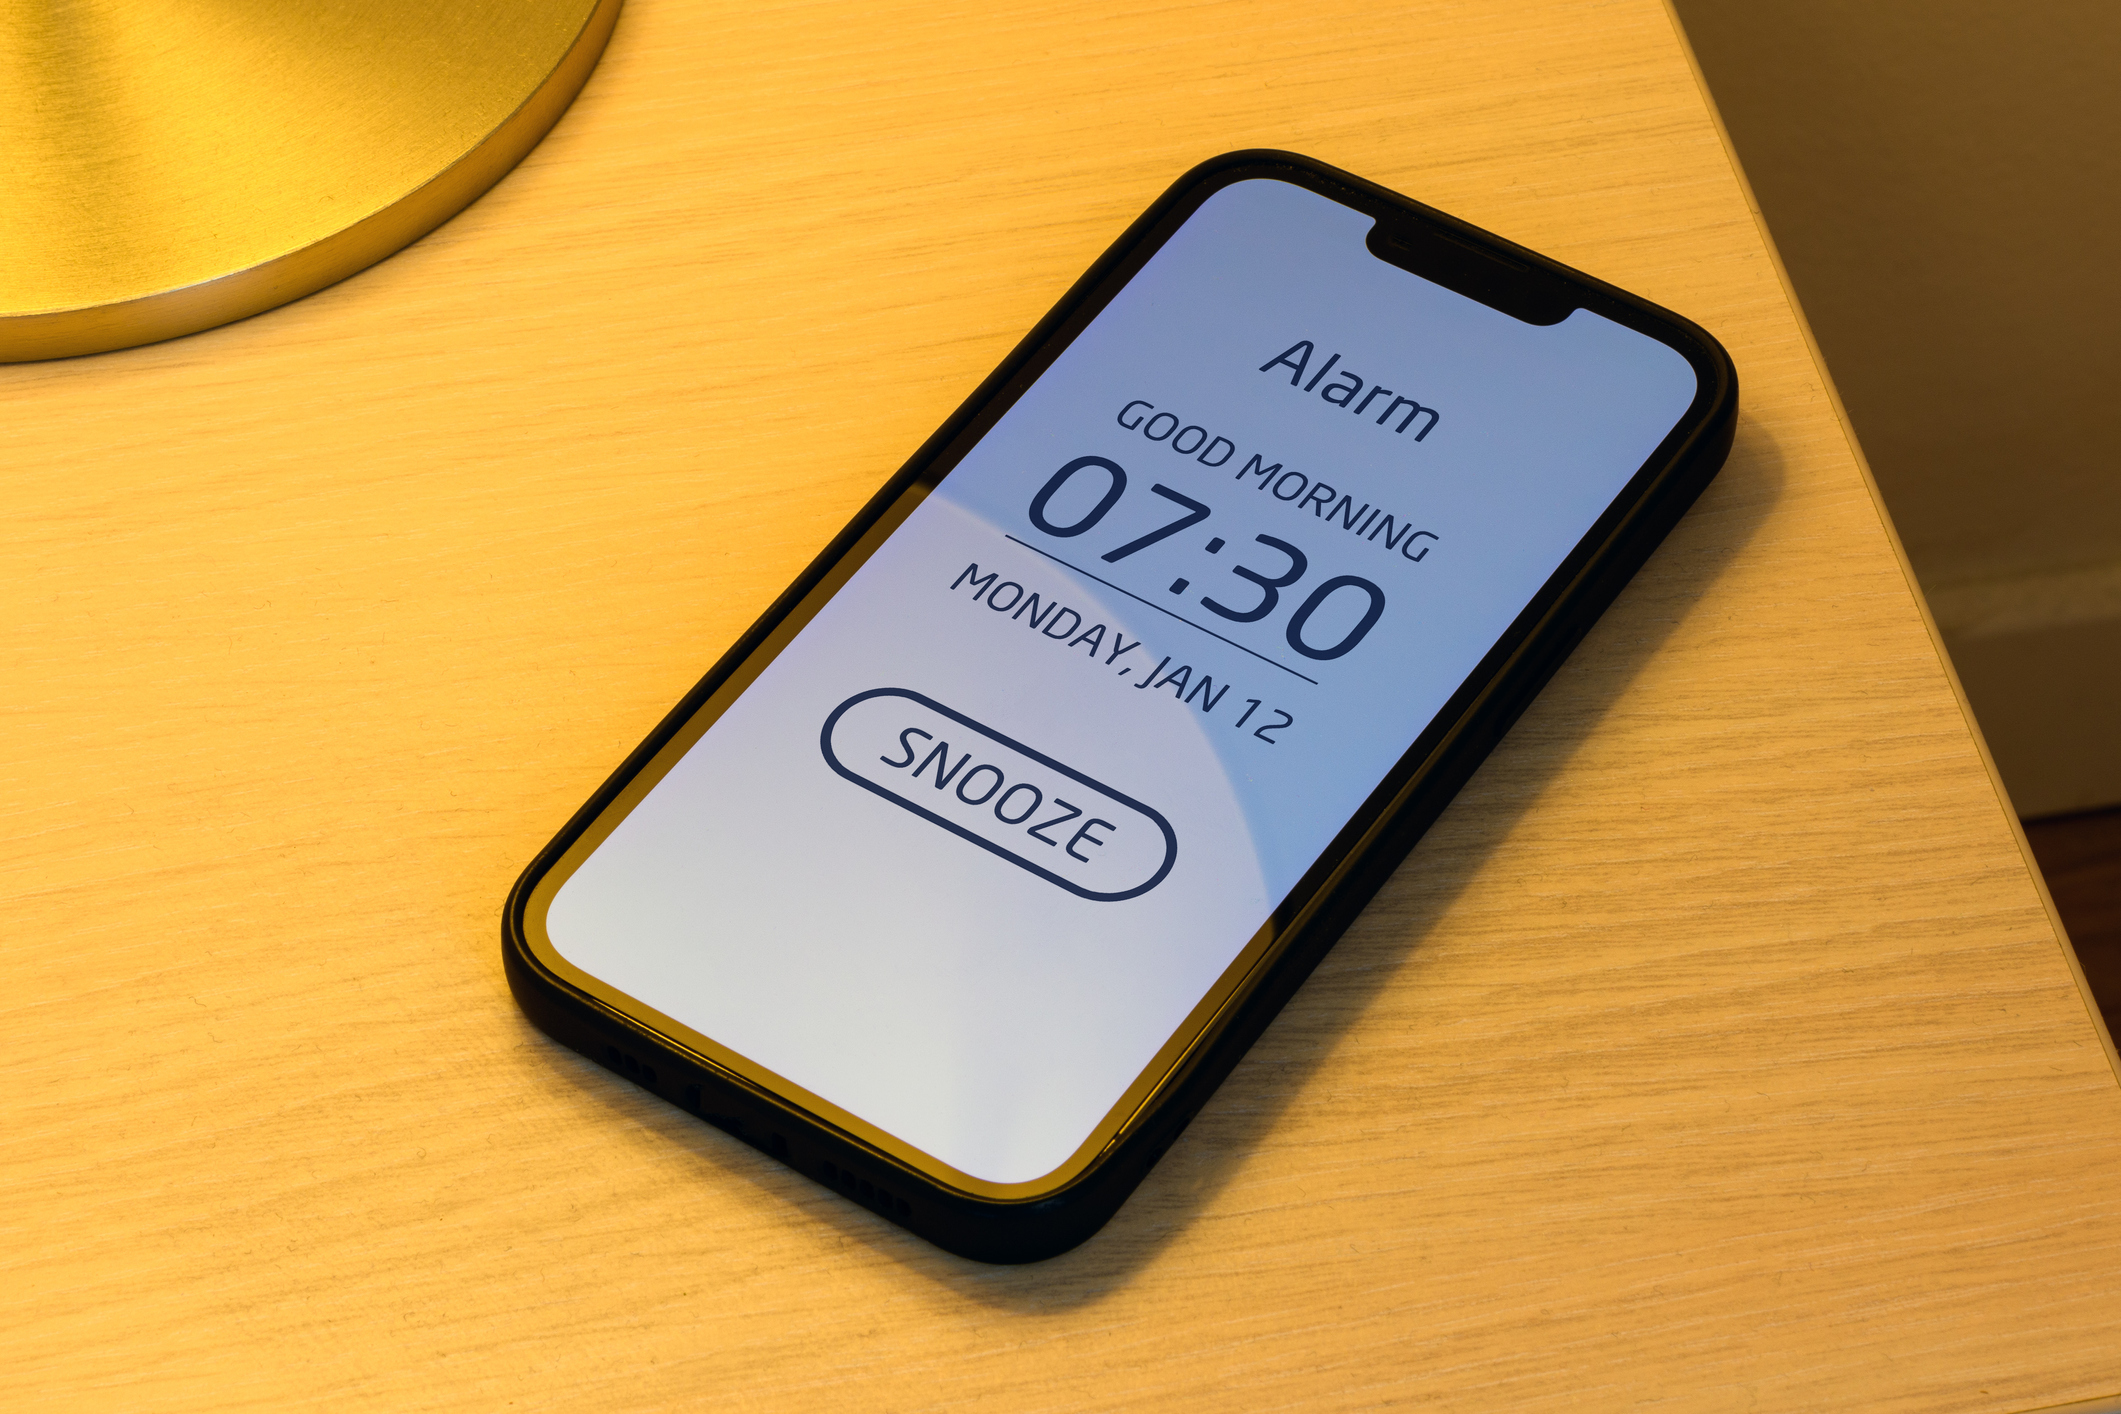 Smartphone alarm clock on bedroom night table with snooze button